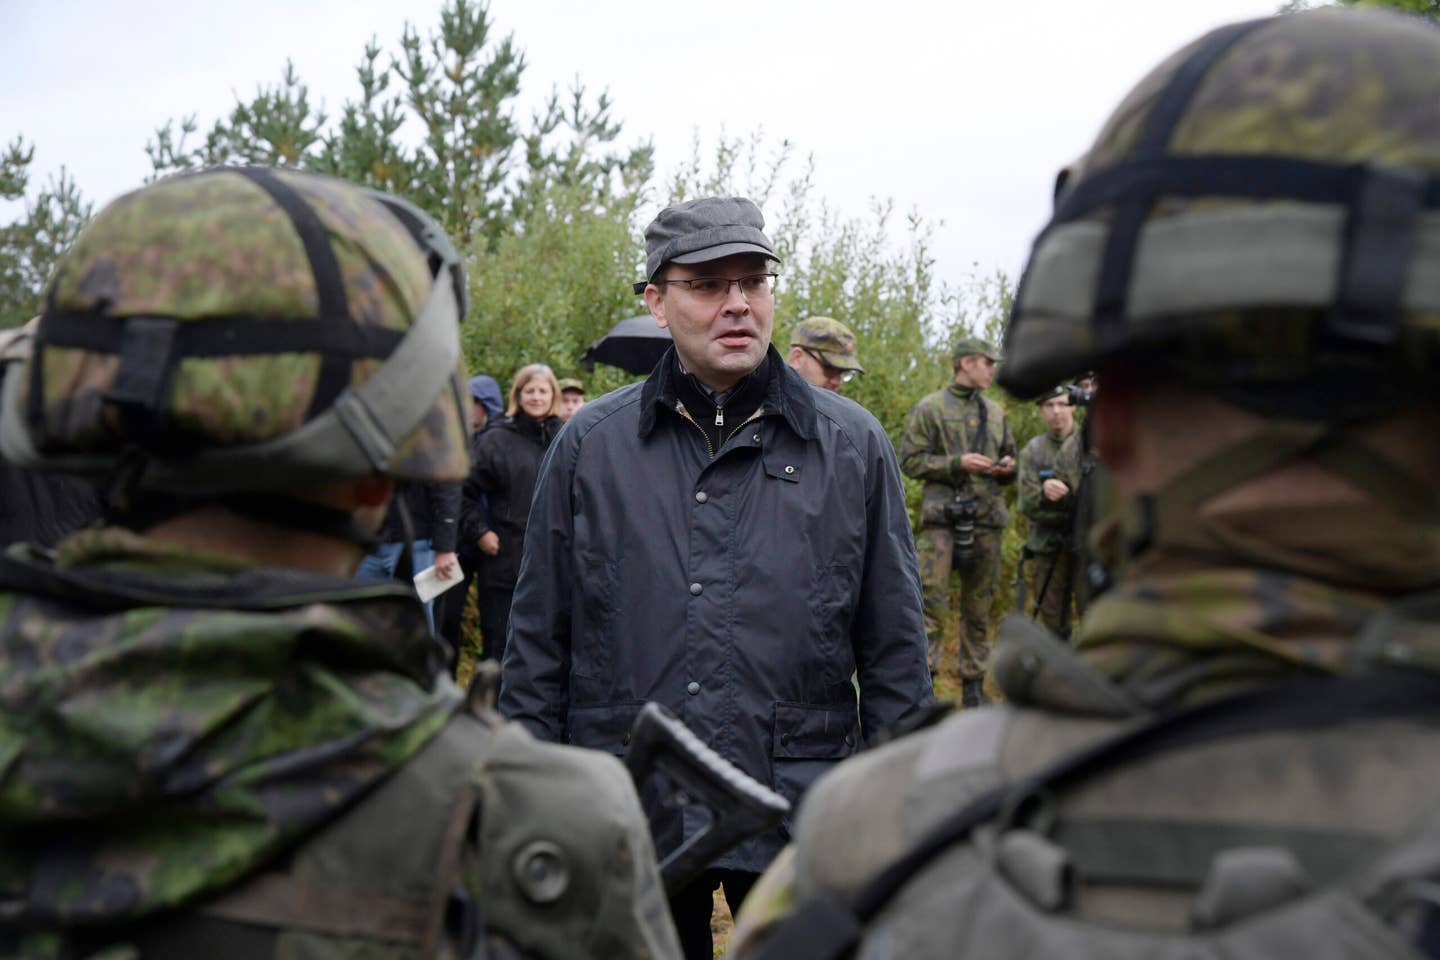 The then-Finnish Minister of Defense Jussi Niinisto inspects Finnish troops during joint maneuvers with Swedish troops in September 2017. <em>ANDERS WIKLUND/AFP via Getty Images</em>